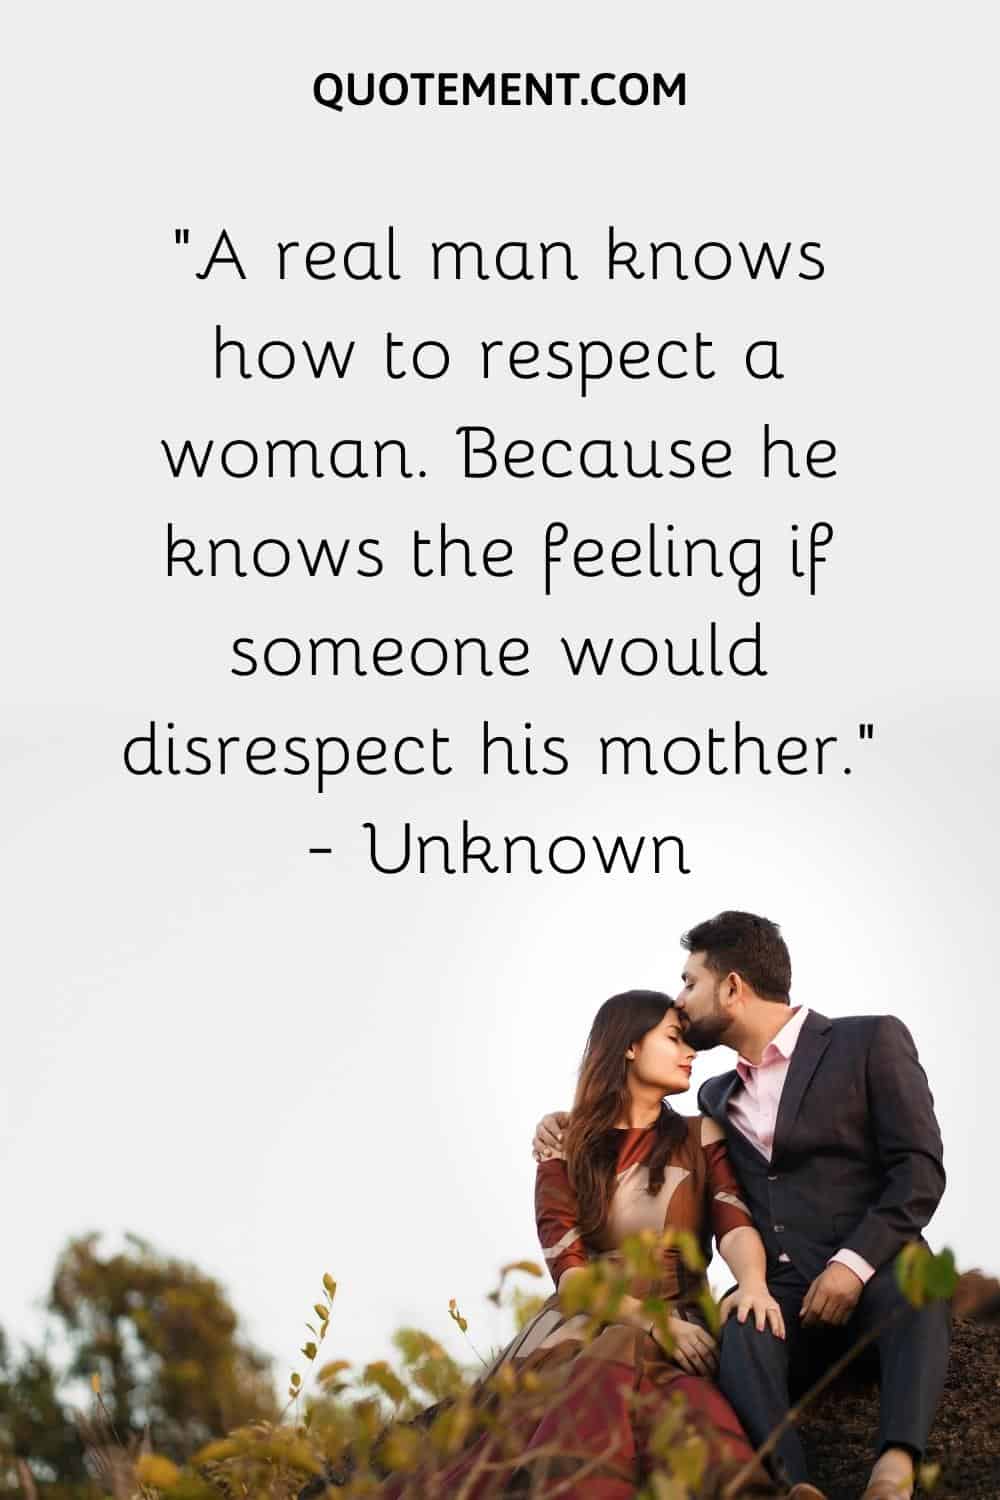 A real man knows how to respect a woman